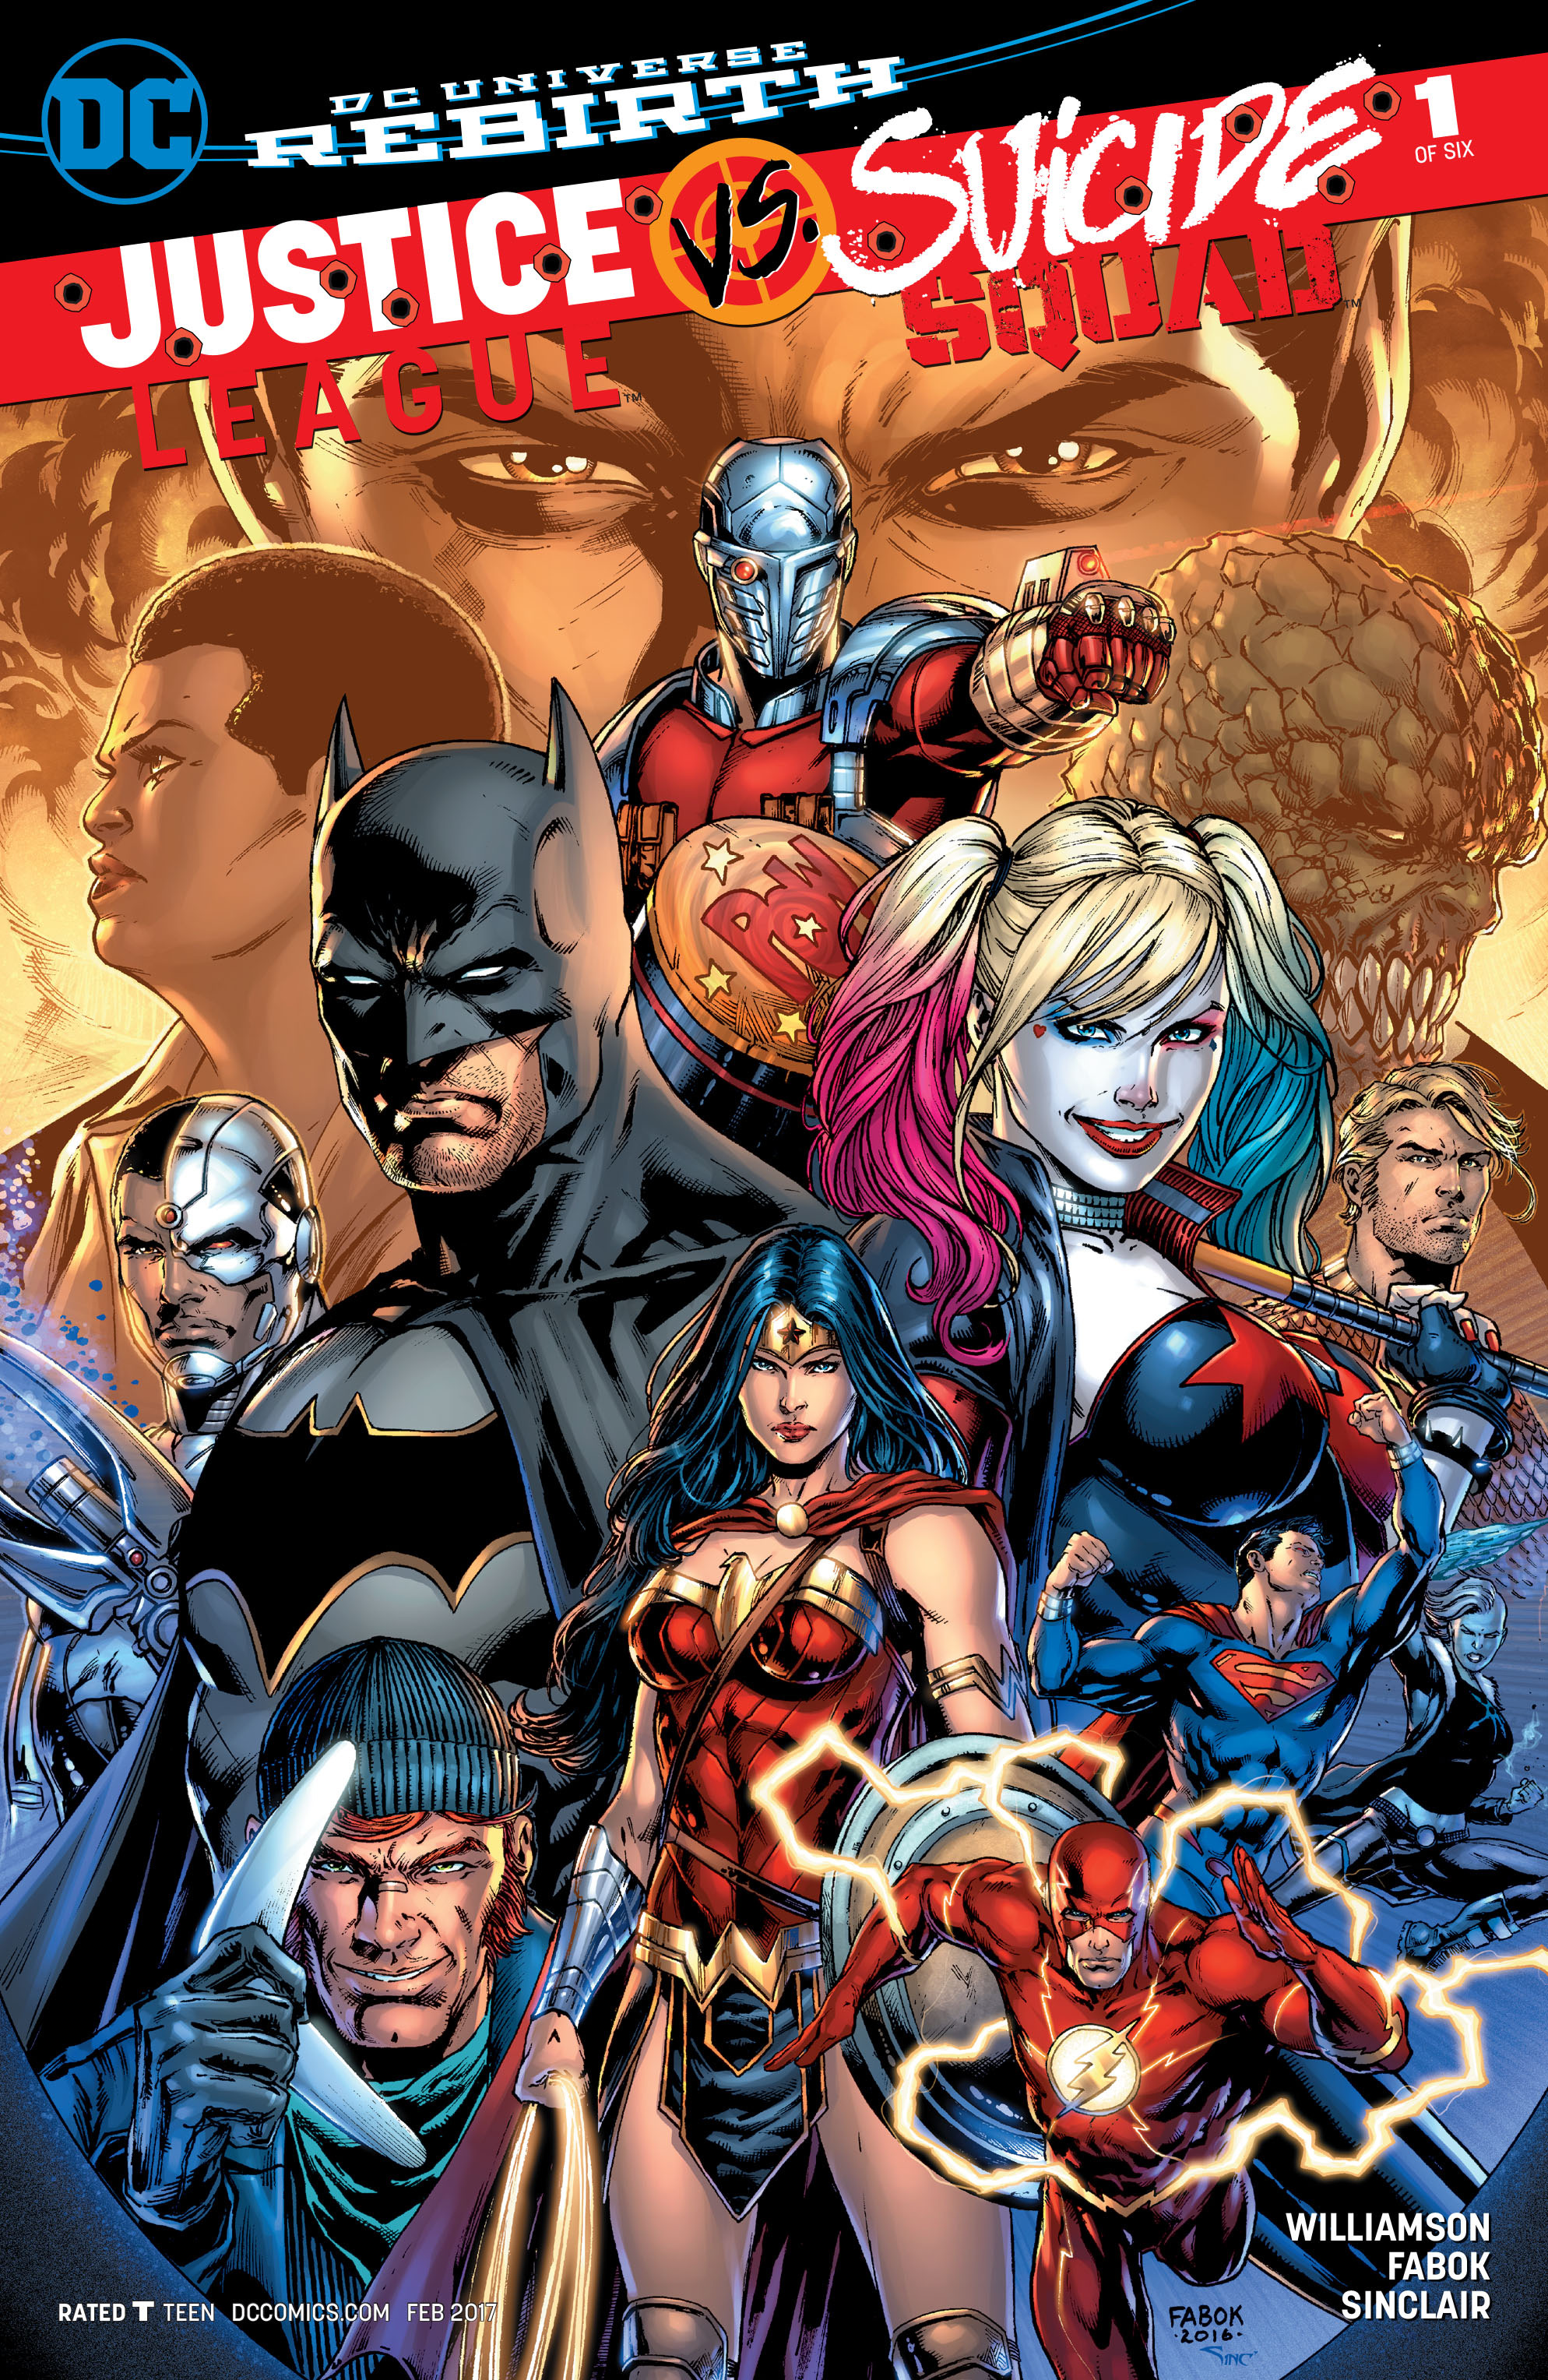 Suicide Squad: Kill the Justice League is getting a five-issue comic